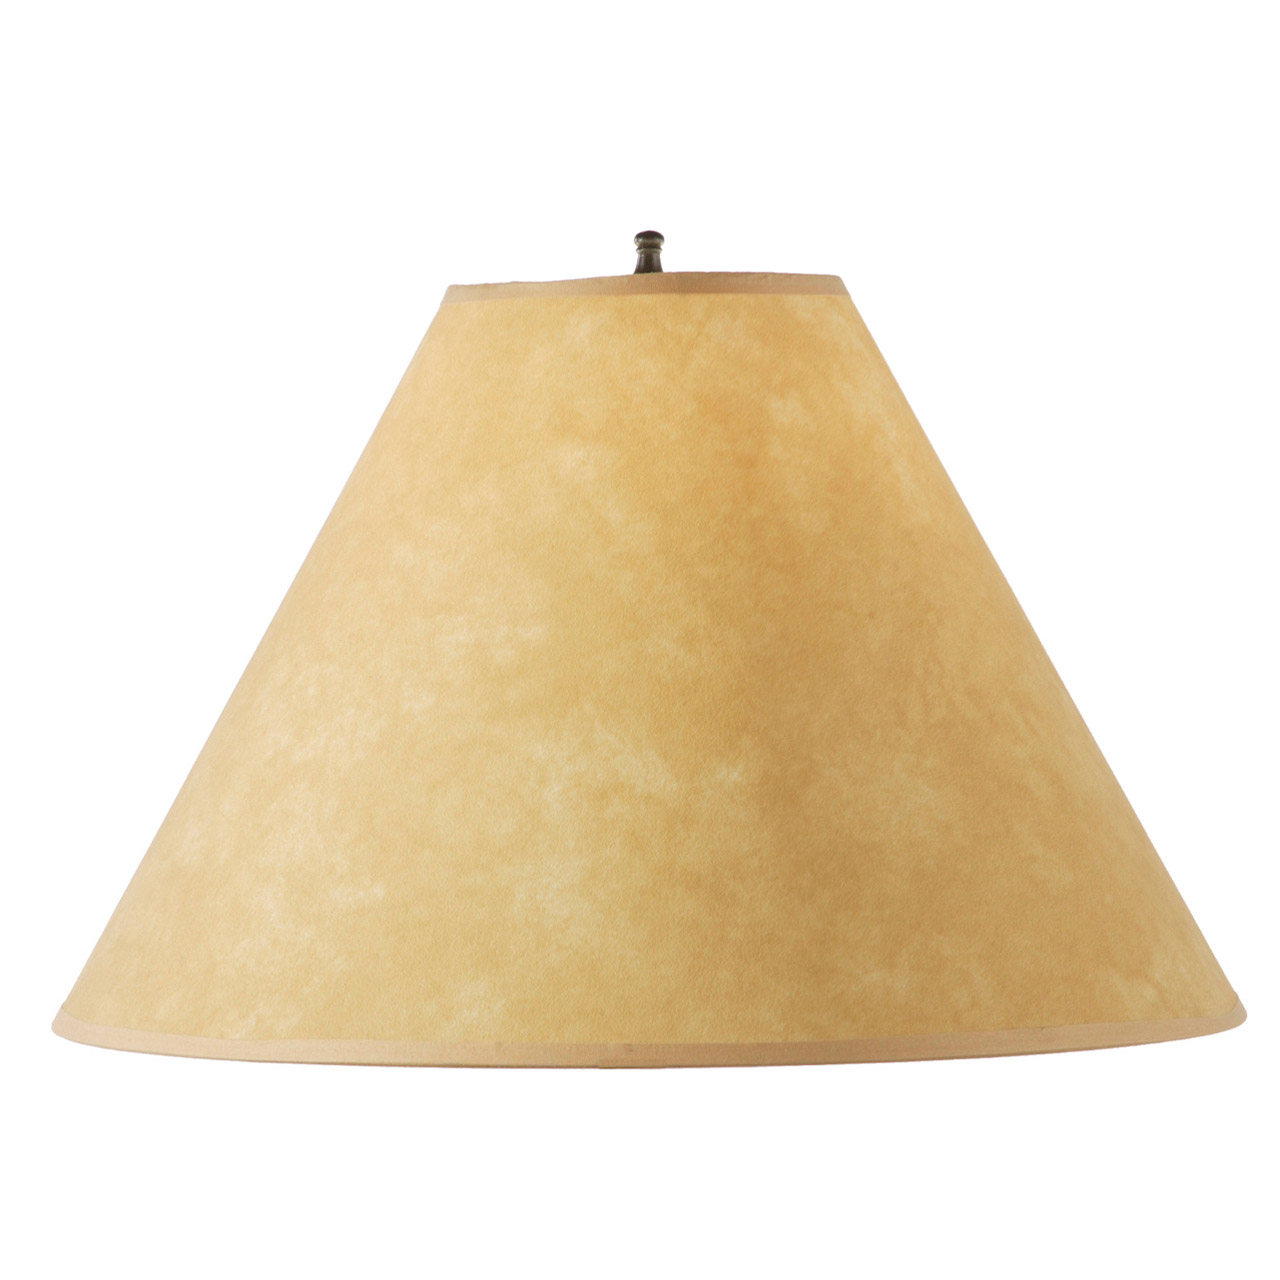 Parchment lamp shade 4